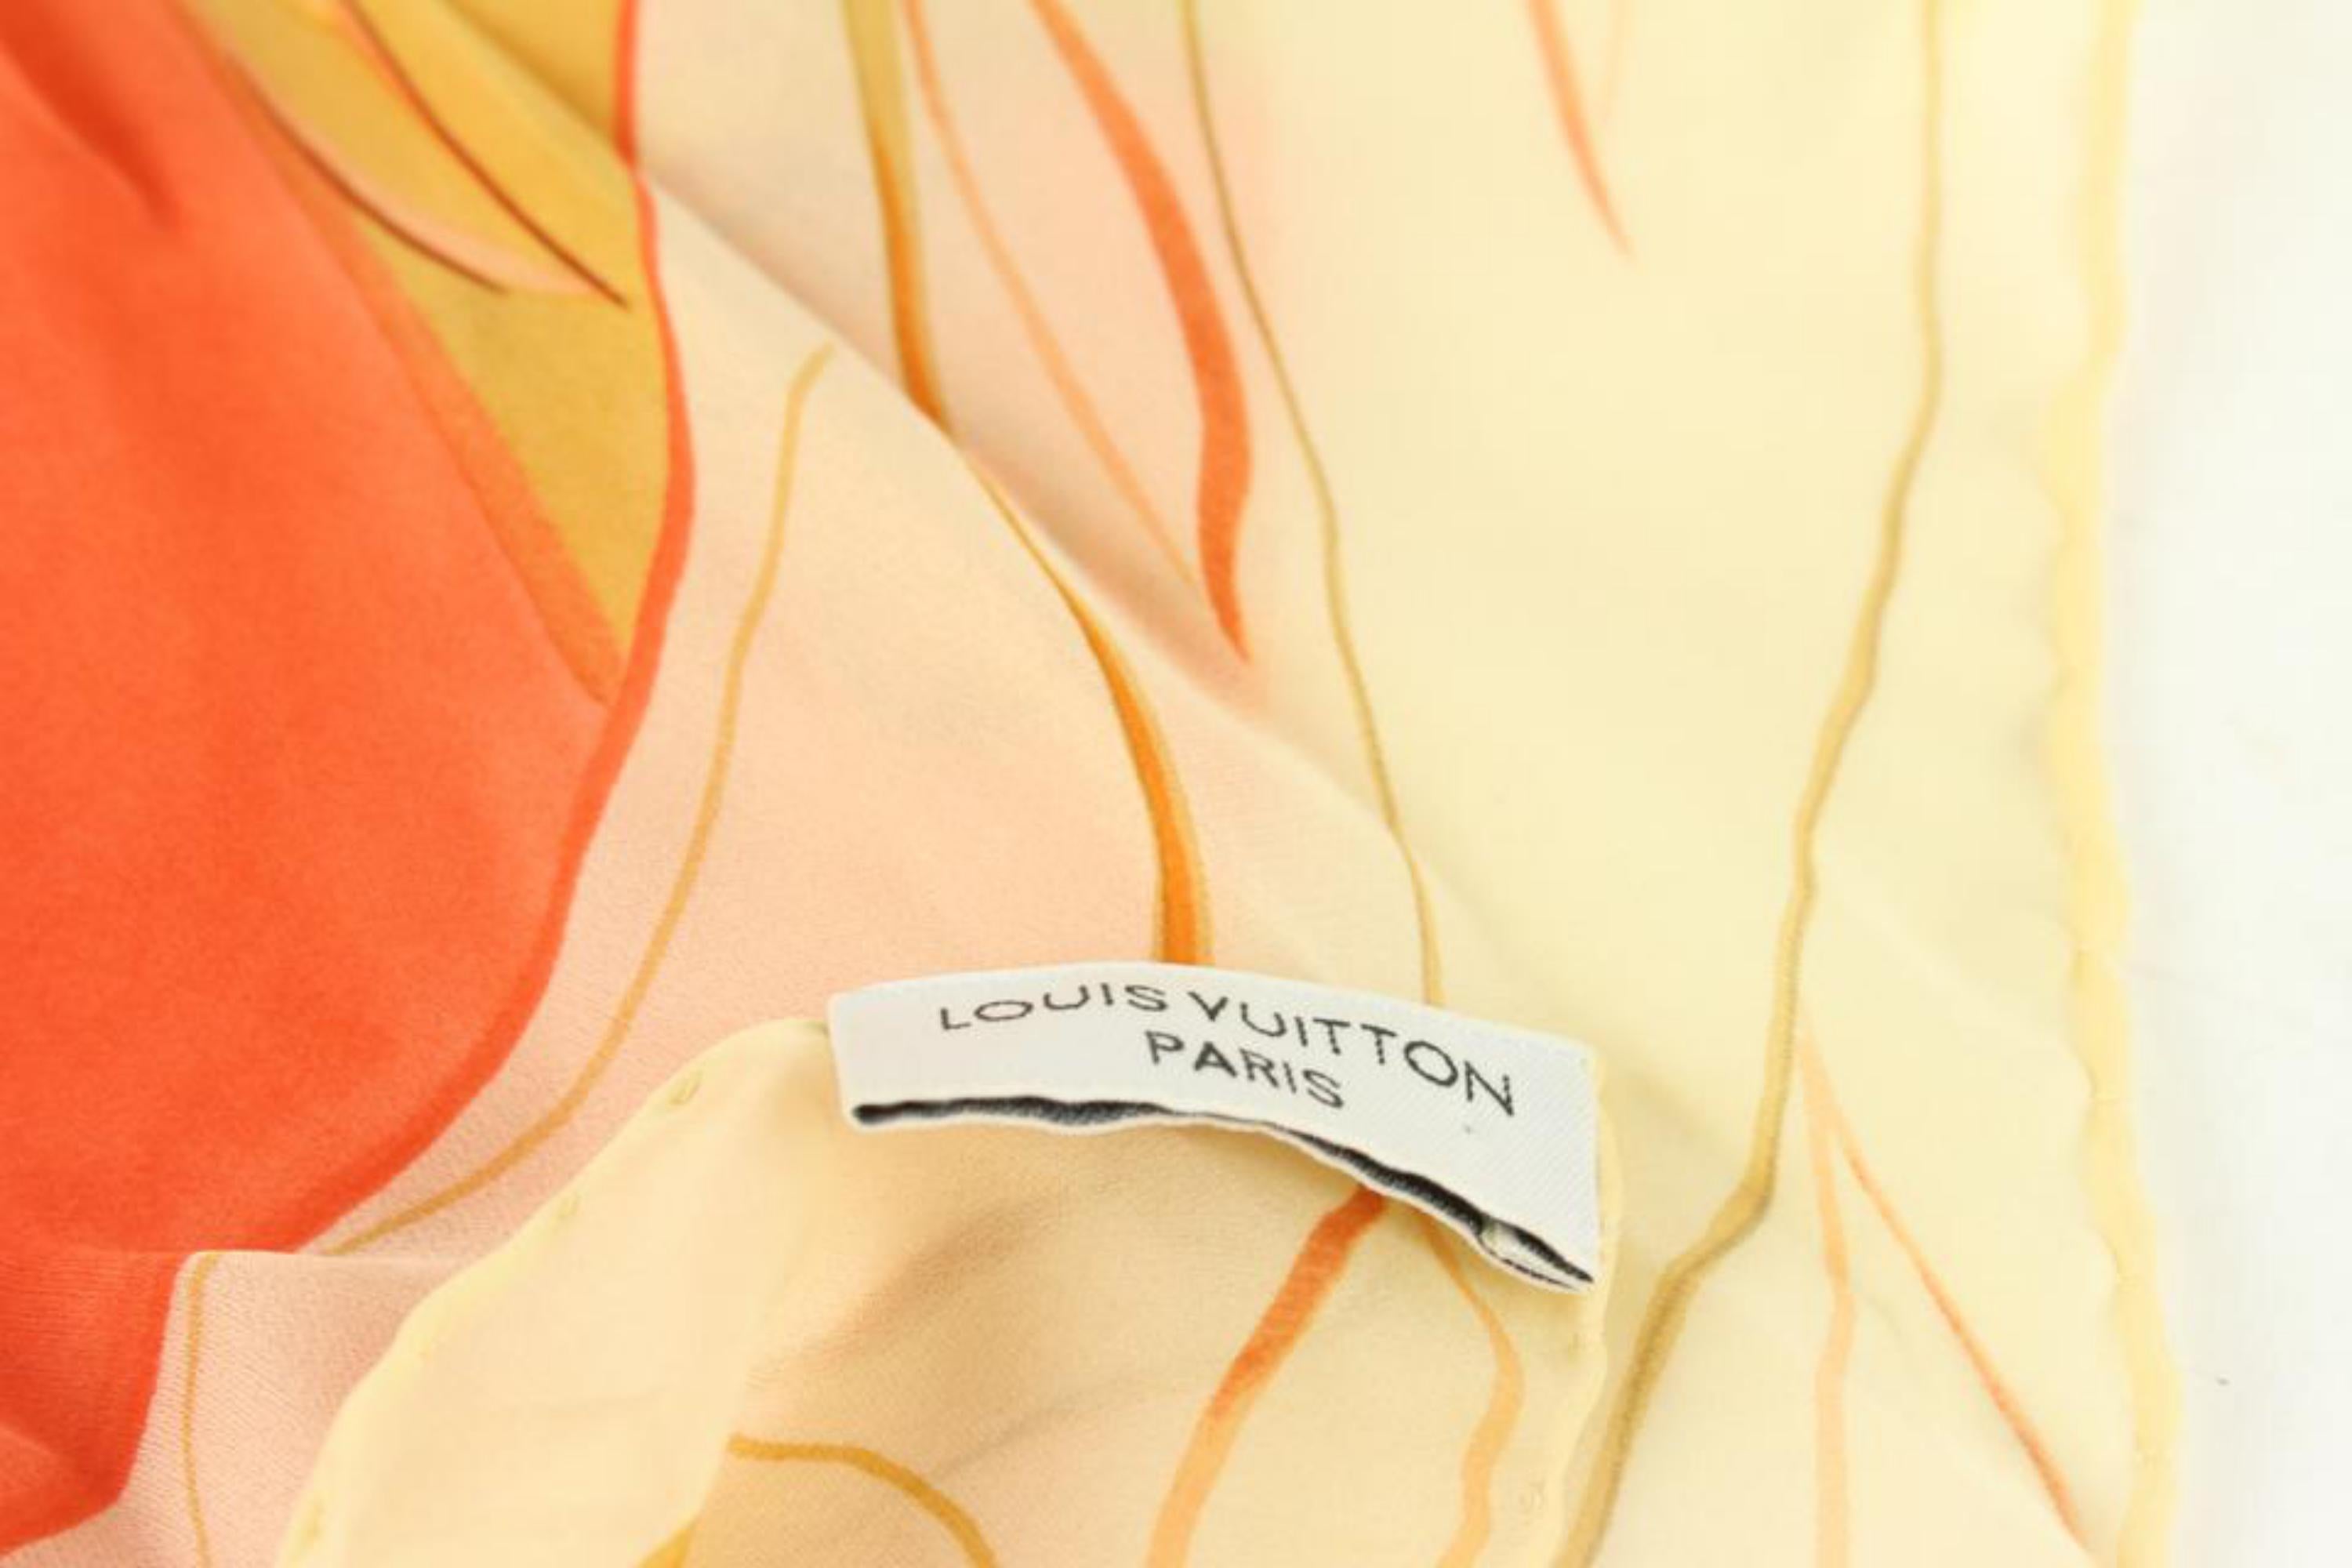 Louis Vuitton Brown x Orange x Cream Sheer Leaf Airplane Scarf 6lv1105
Made In: Italy
Measurements: Length: 37.5 